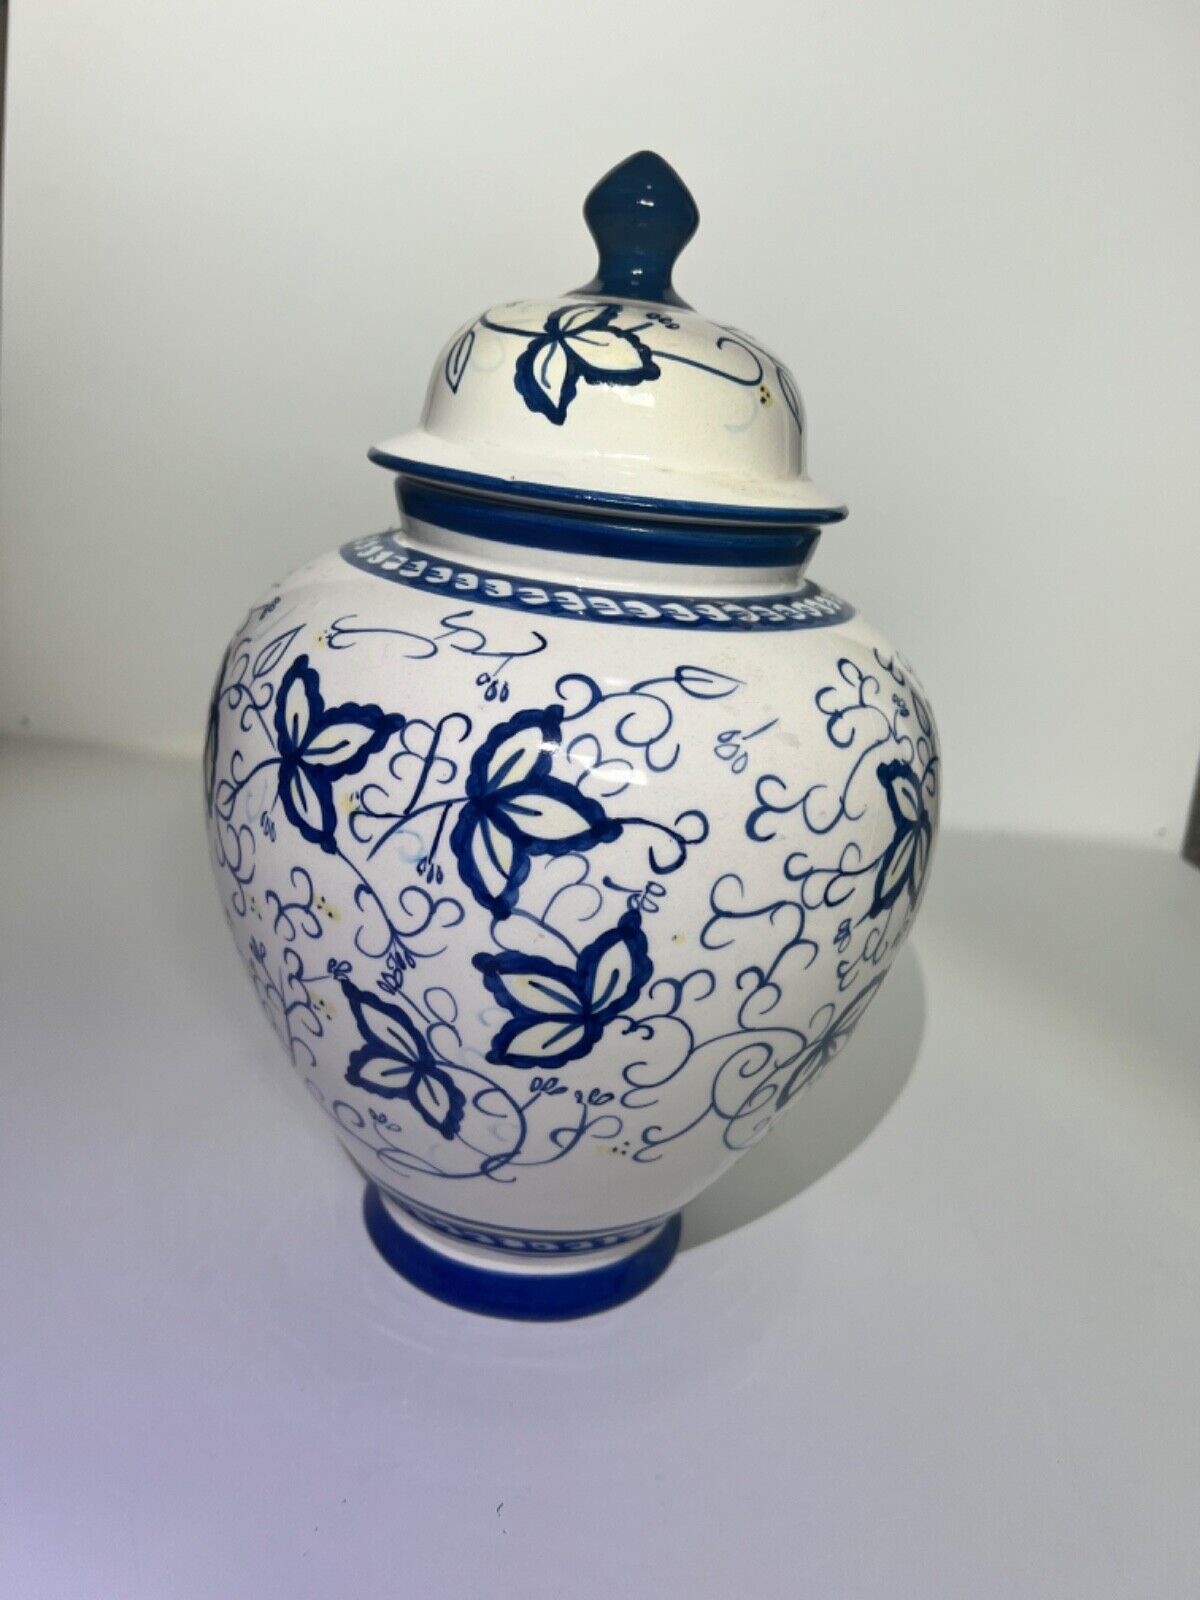 12” Vintage Blue and White with Yellow Flowers Hand Painted Ceramic Ginger Jar